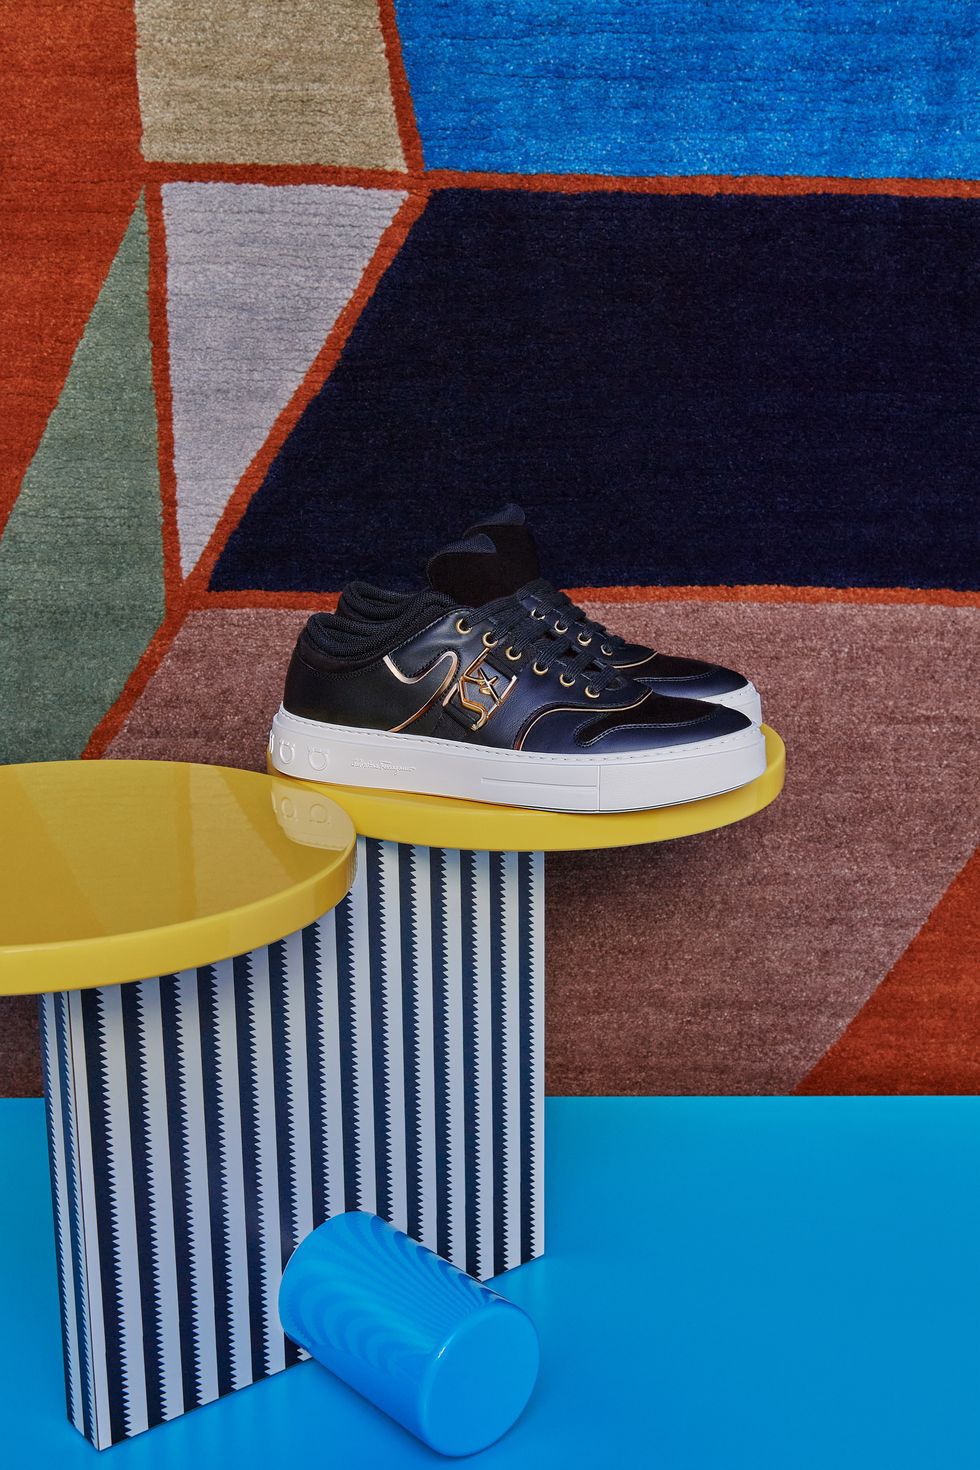 The Coolest Shoes and Accessories for Every Kind of Guy